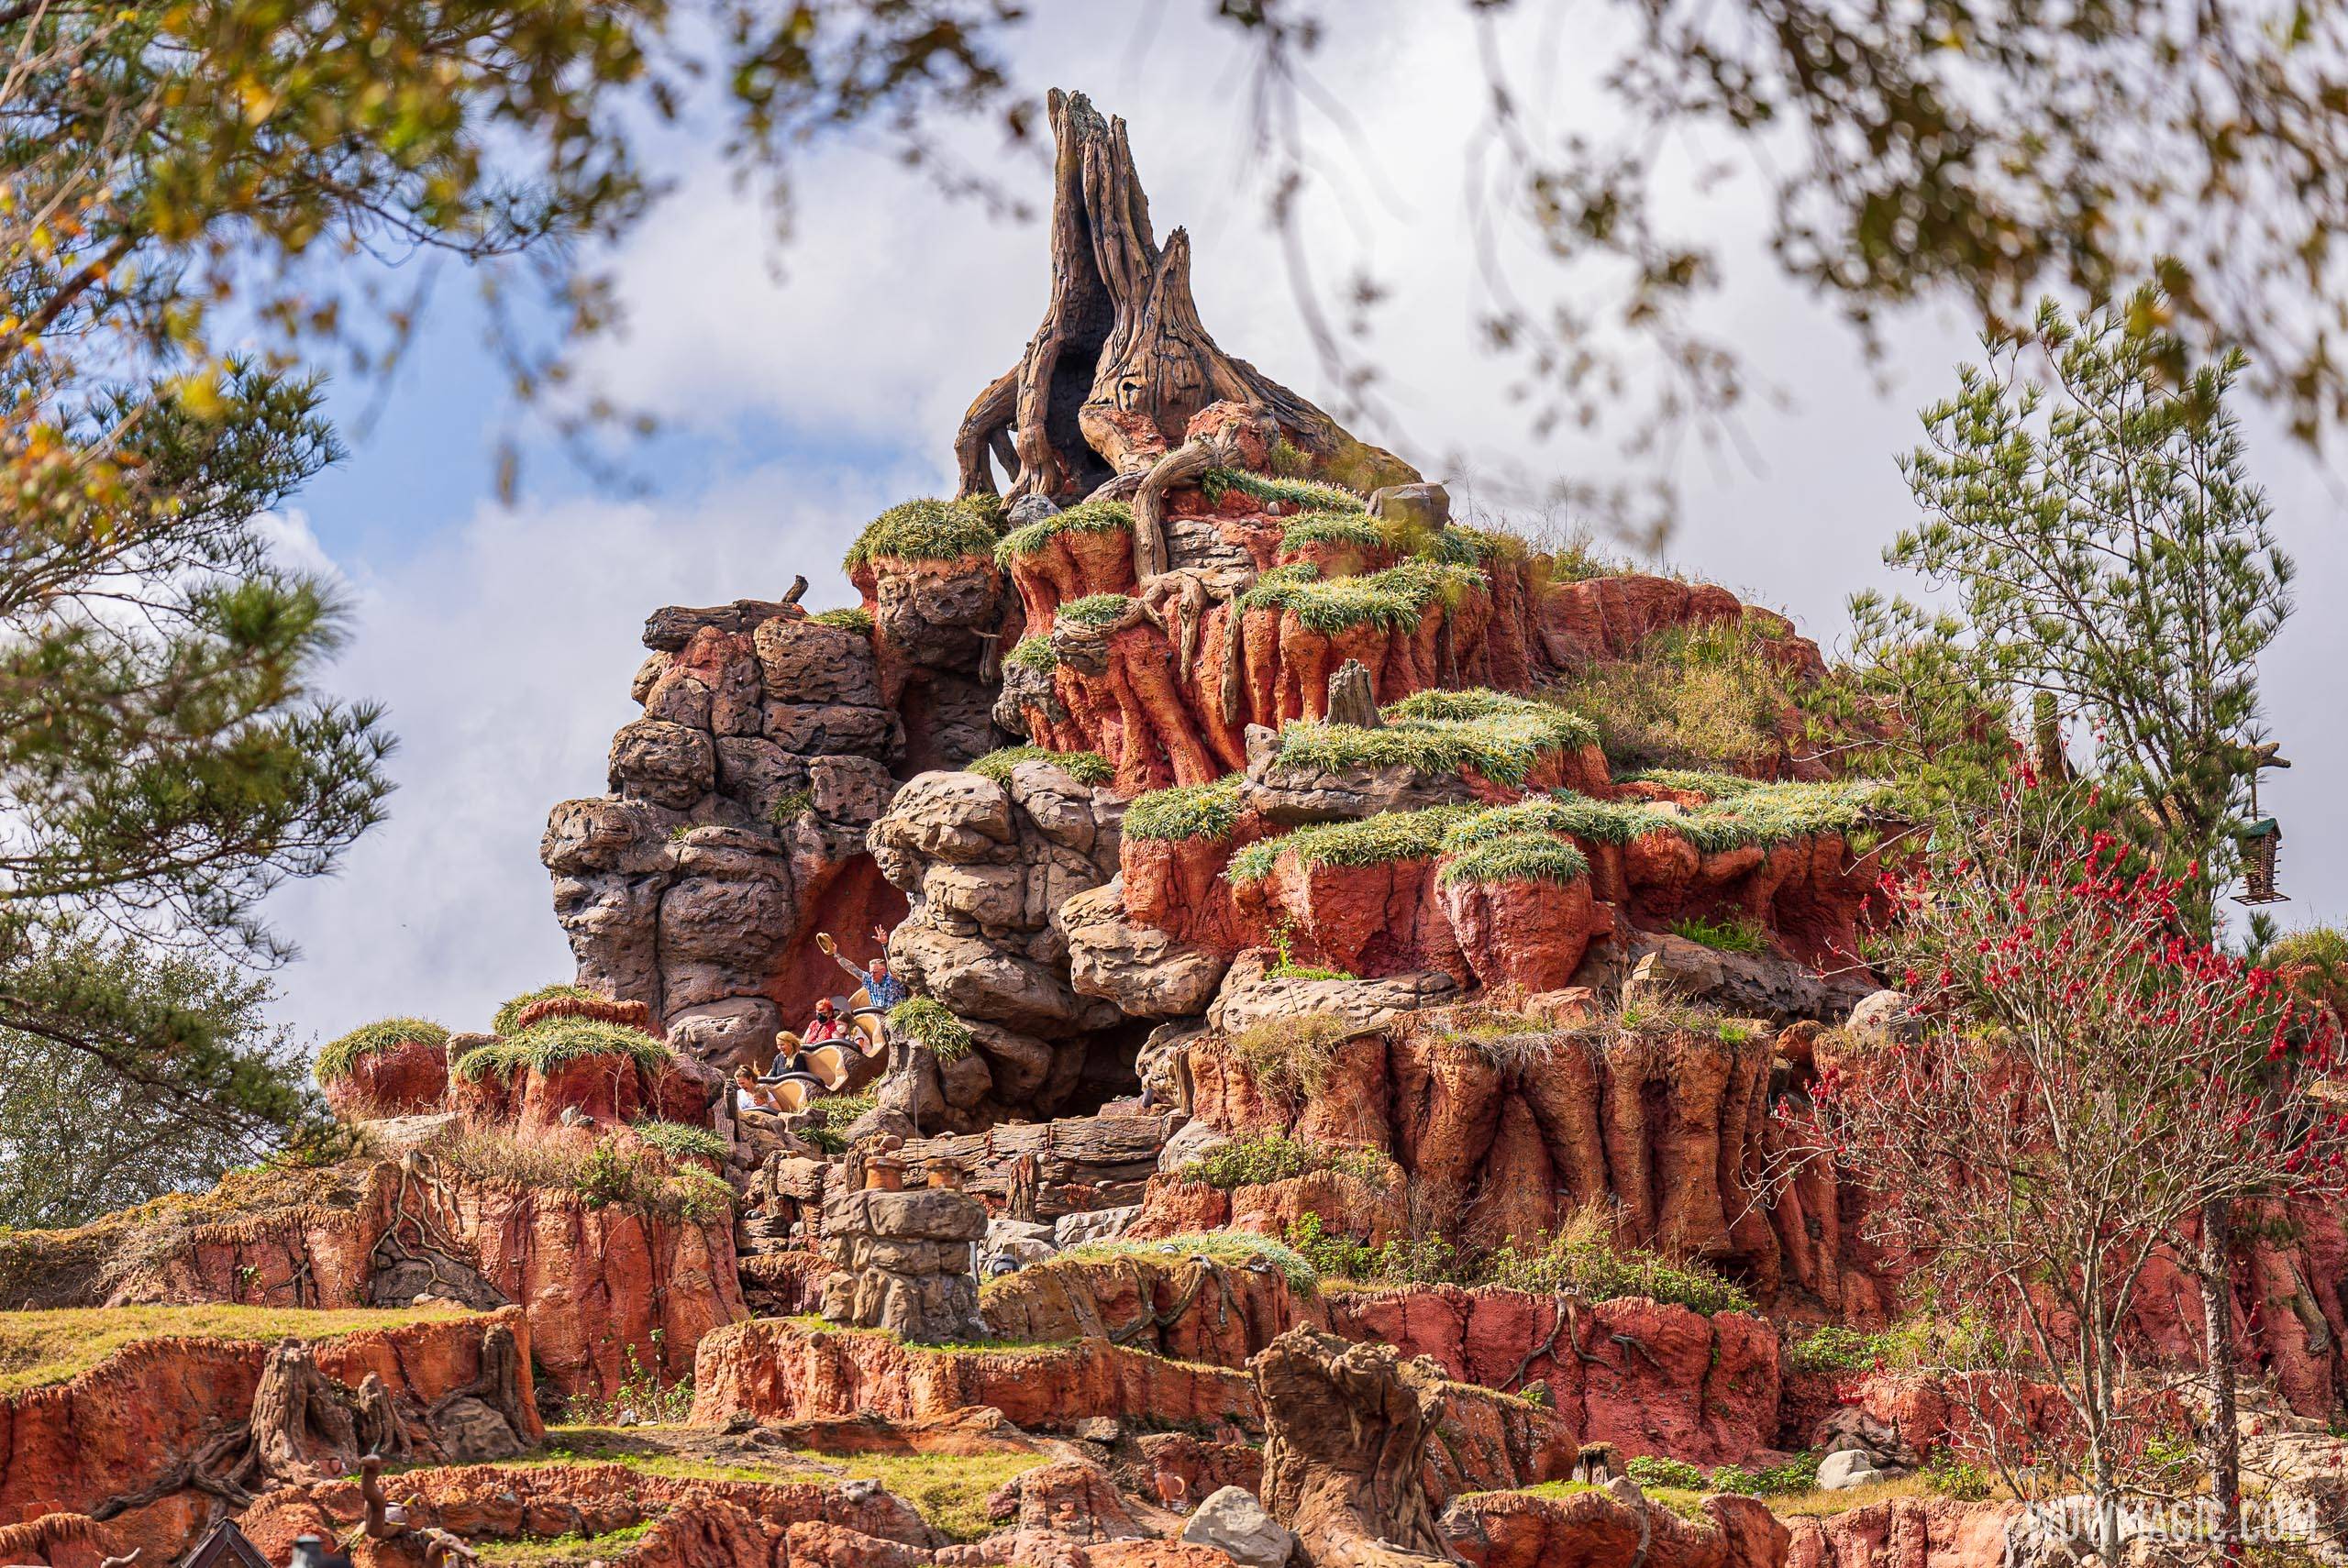 Changes coming to Splash Mountain entry area